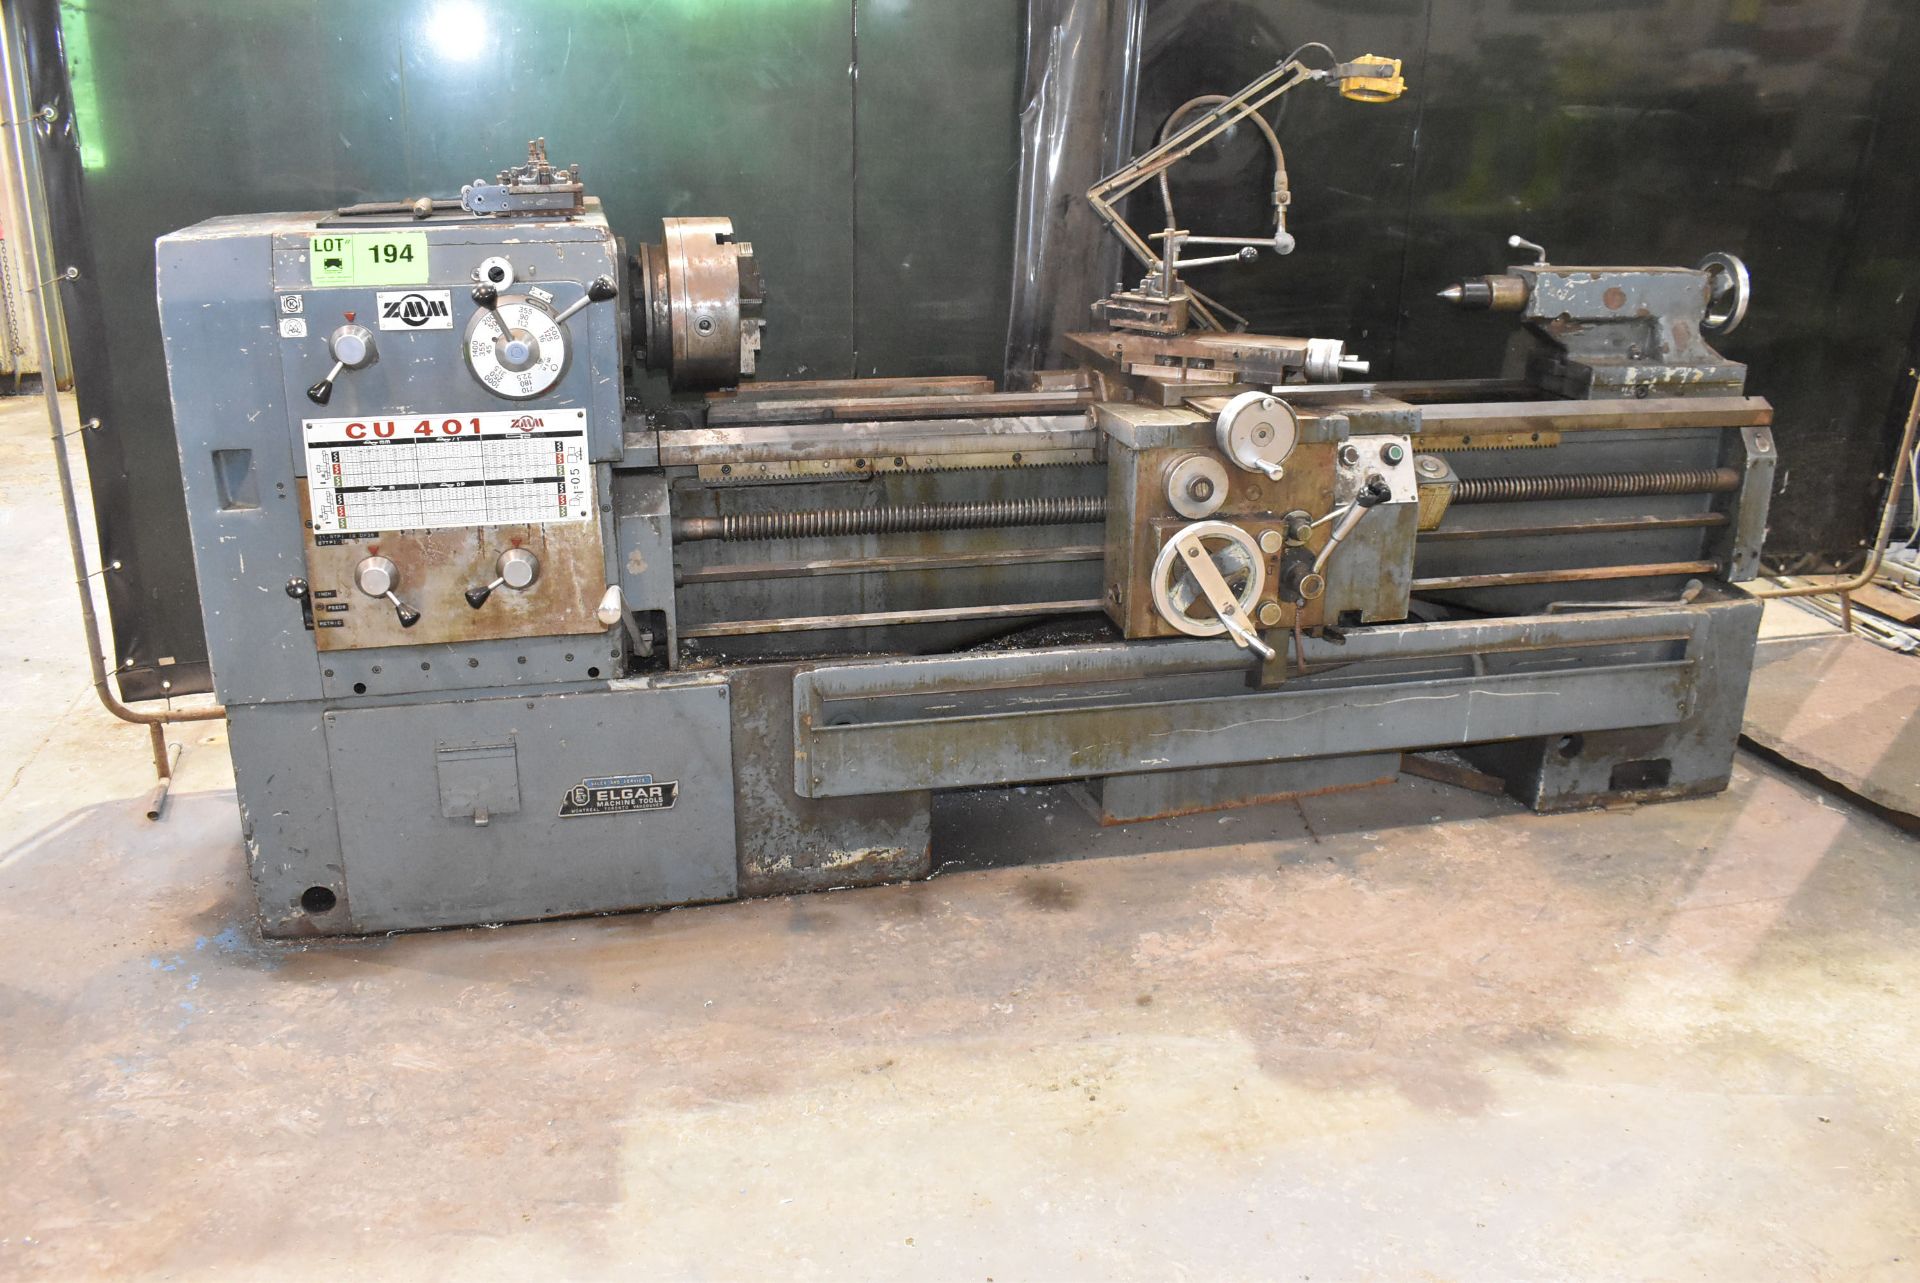 ZMM CU401 GAP BED ENGINE LATHE WITH 12" 3 JAW CHUCK, 64" BETWEEN CENTERS, 21" SWING OVER BED, 3.